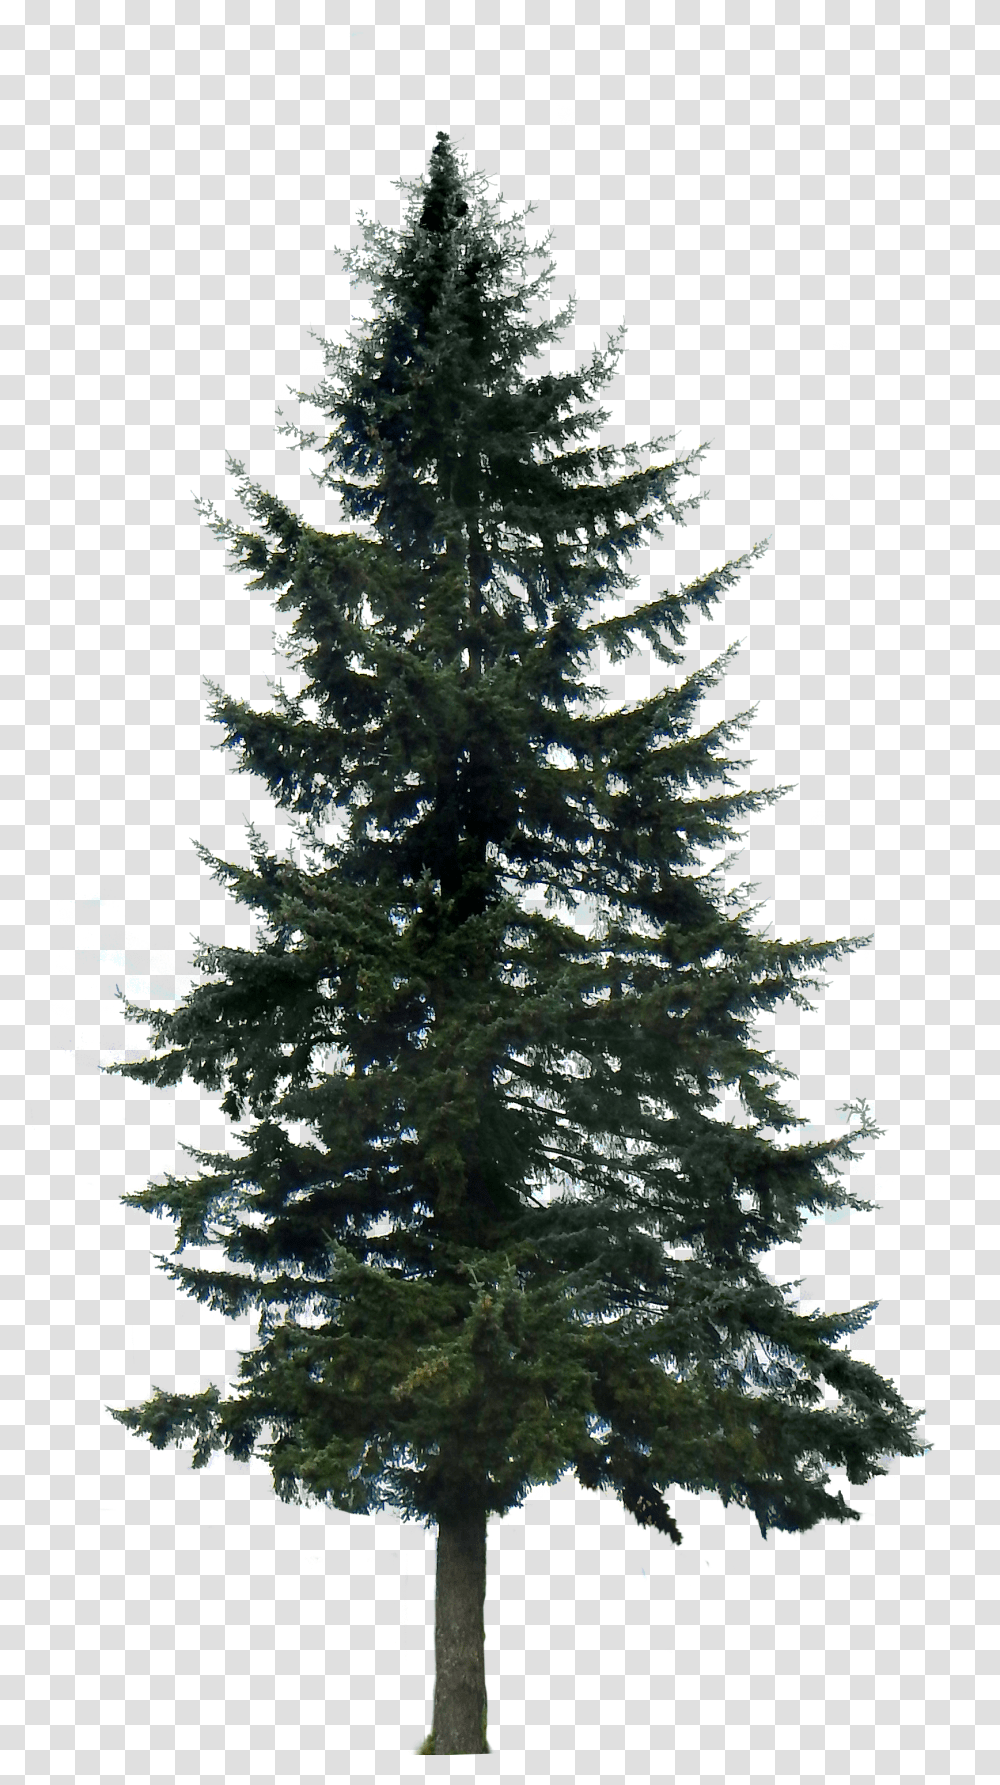 Western Yellow Pine Tree Clip Art Pine Tree With No Background Transparent Png